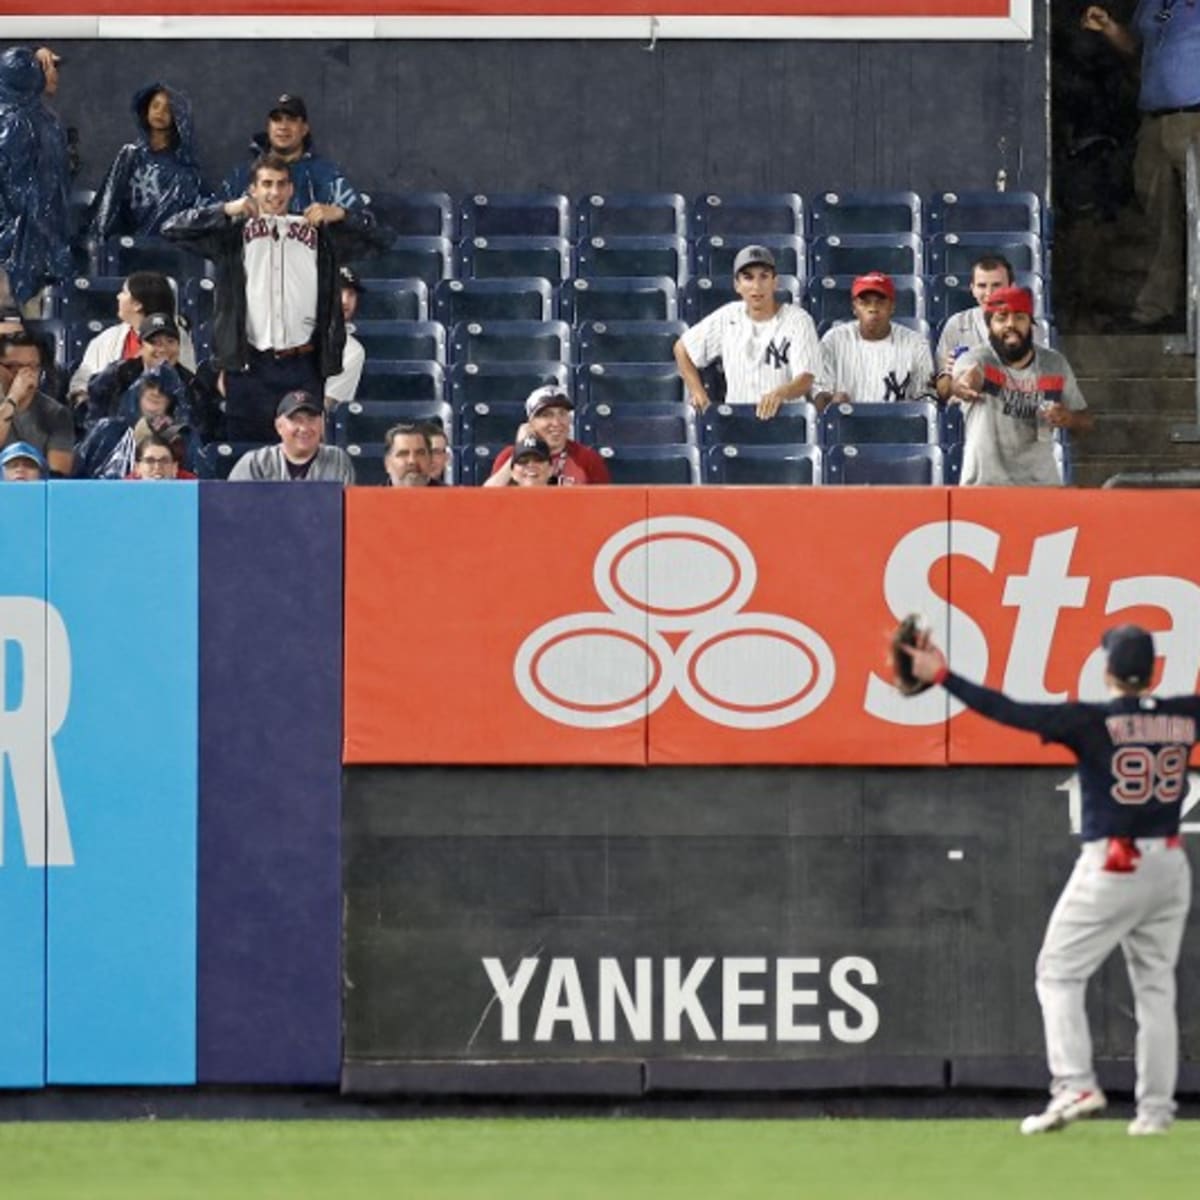 Yankees and Red Sox fans brawl in bleachers in viral video